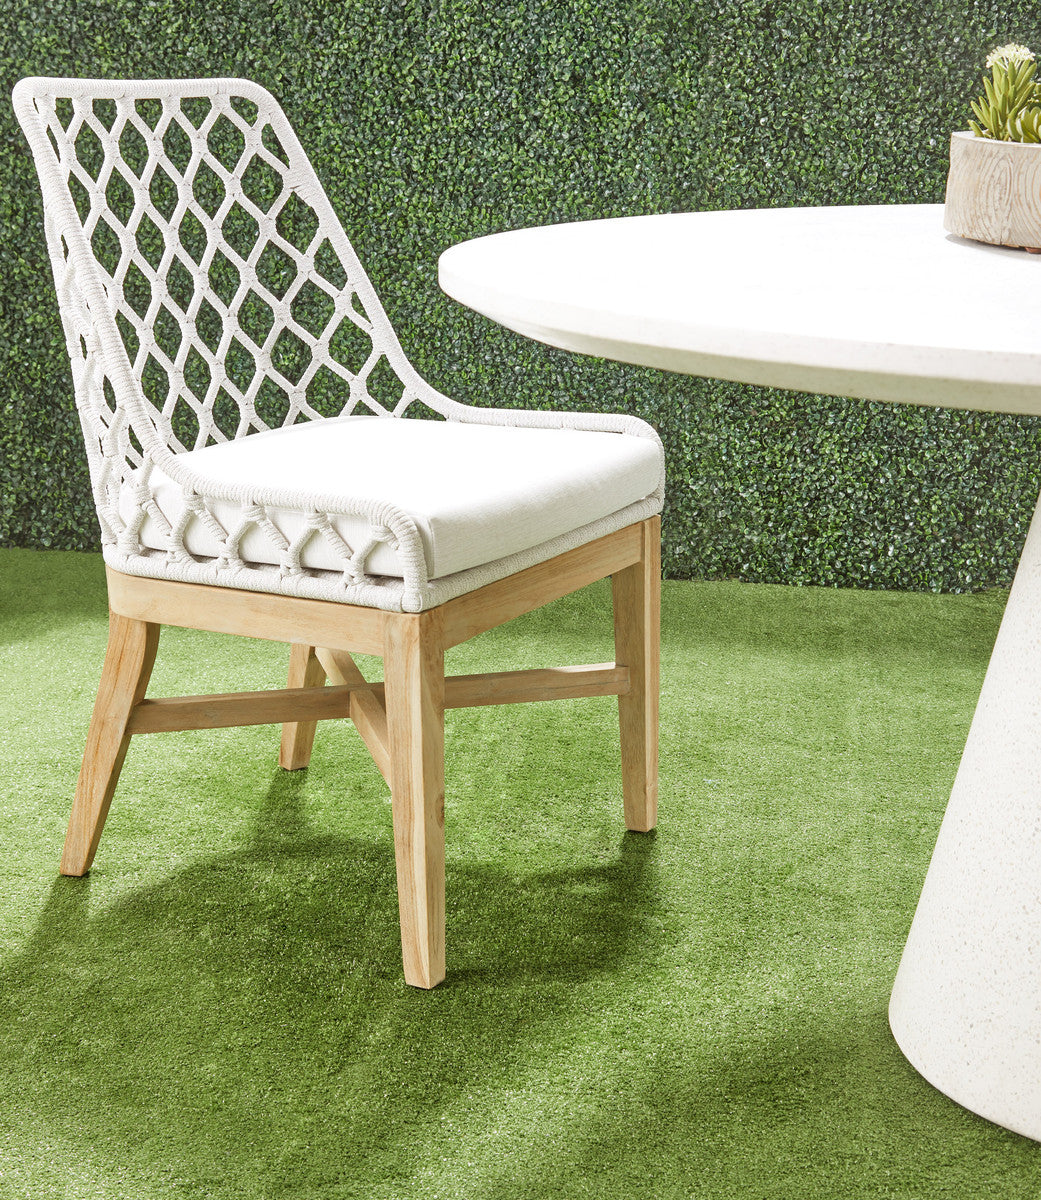 Lattis Outdoor Dining Chair in White Speckle Flat Rope, Performance White Speckle, Gray Teak - 6803.WHT/WHT/GT